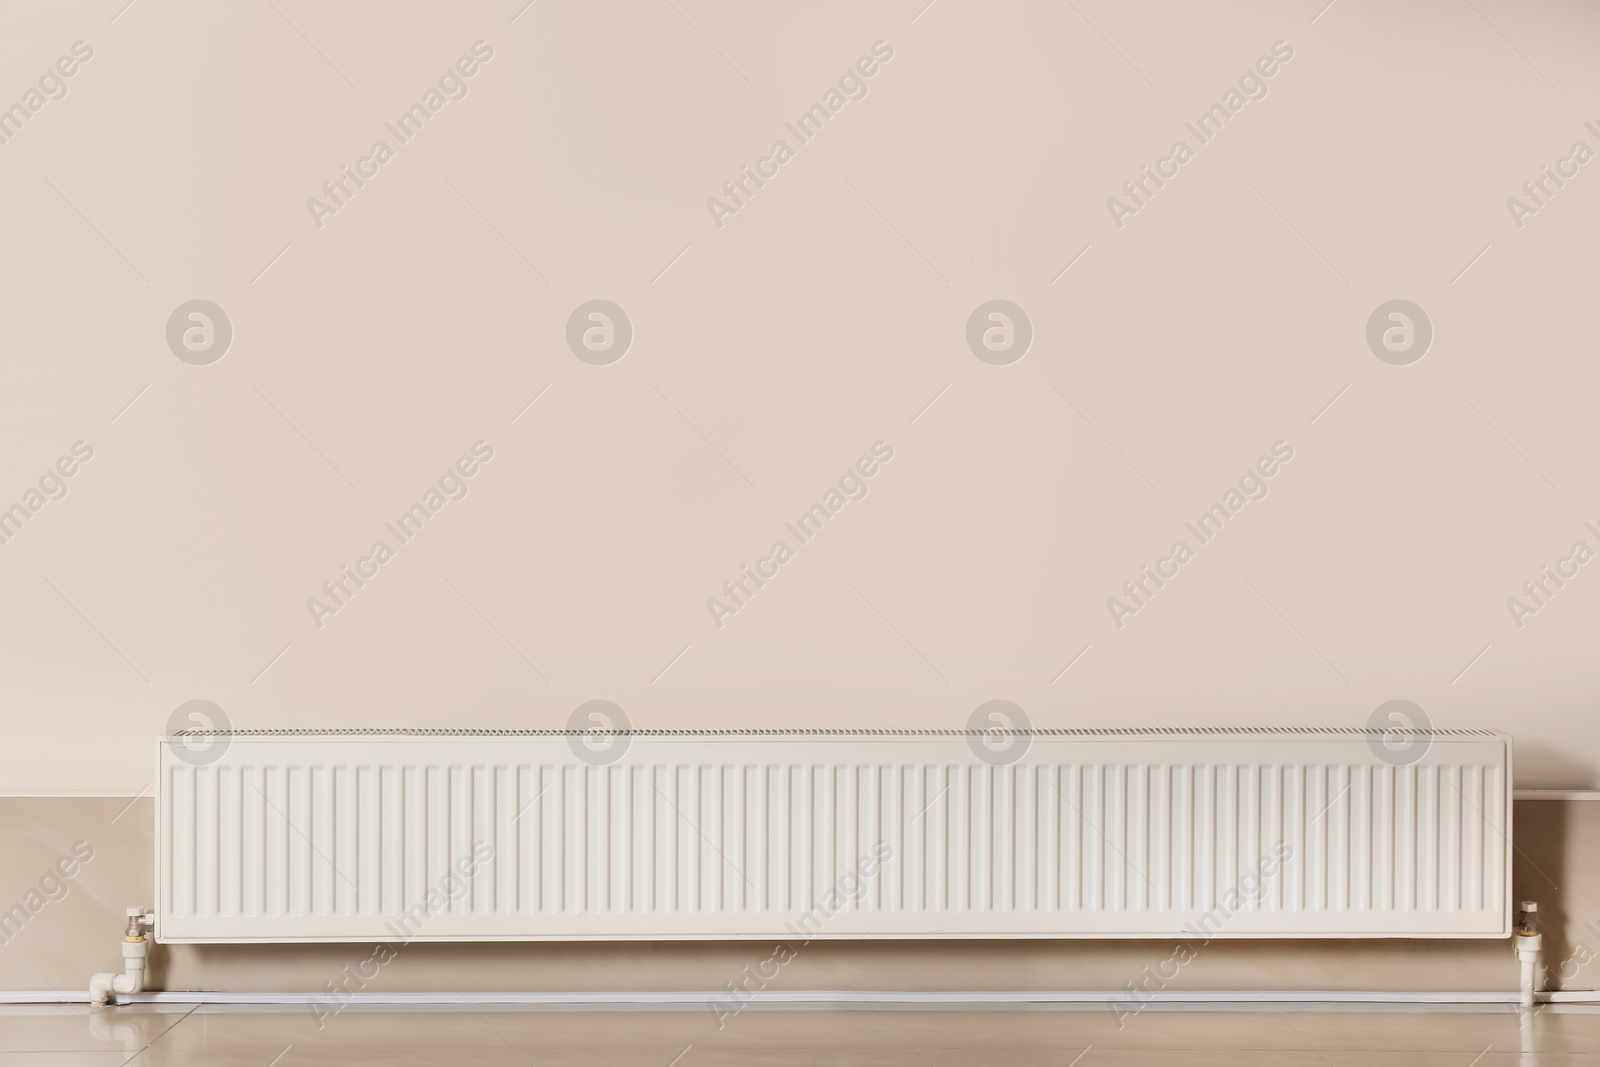 Photo of Heating radiator in empty room against closed window